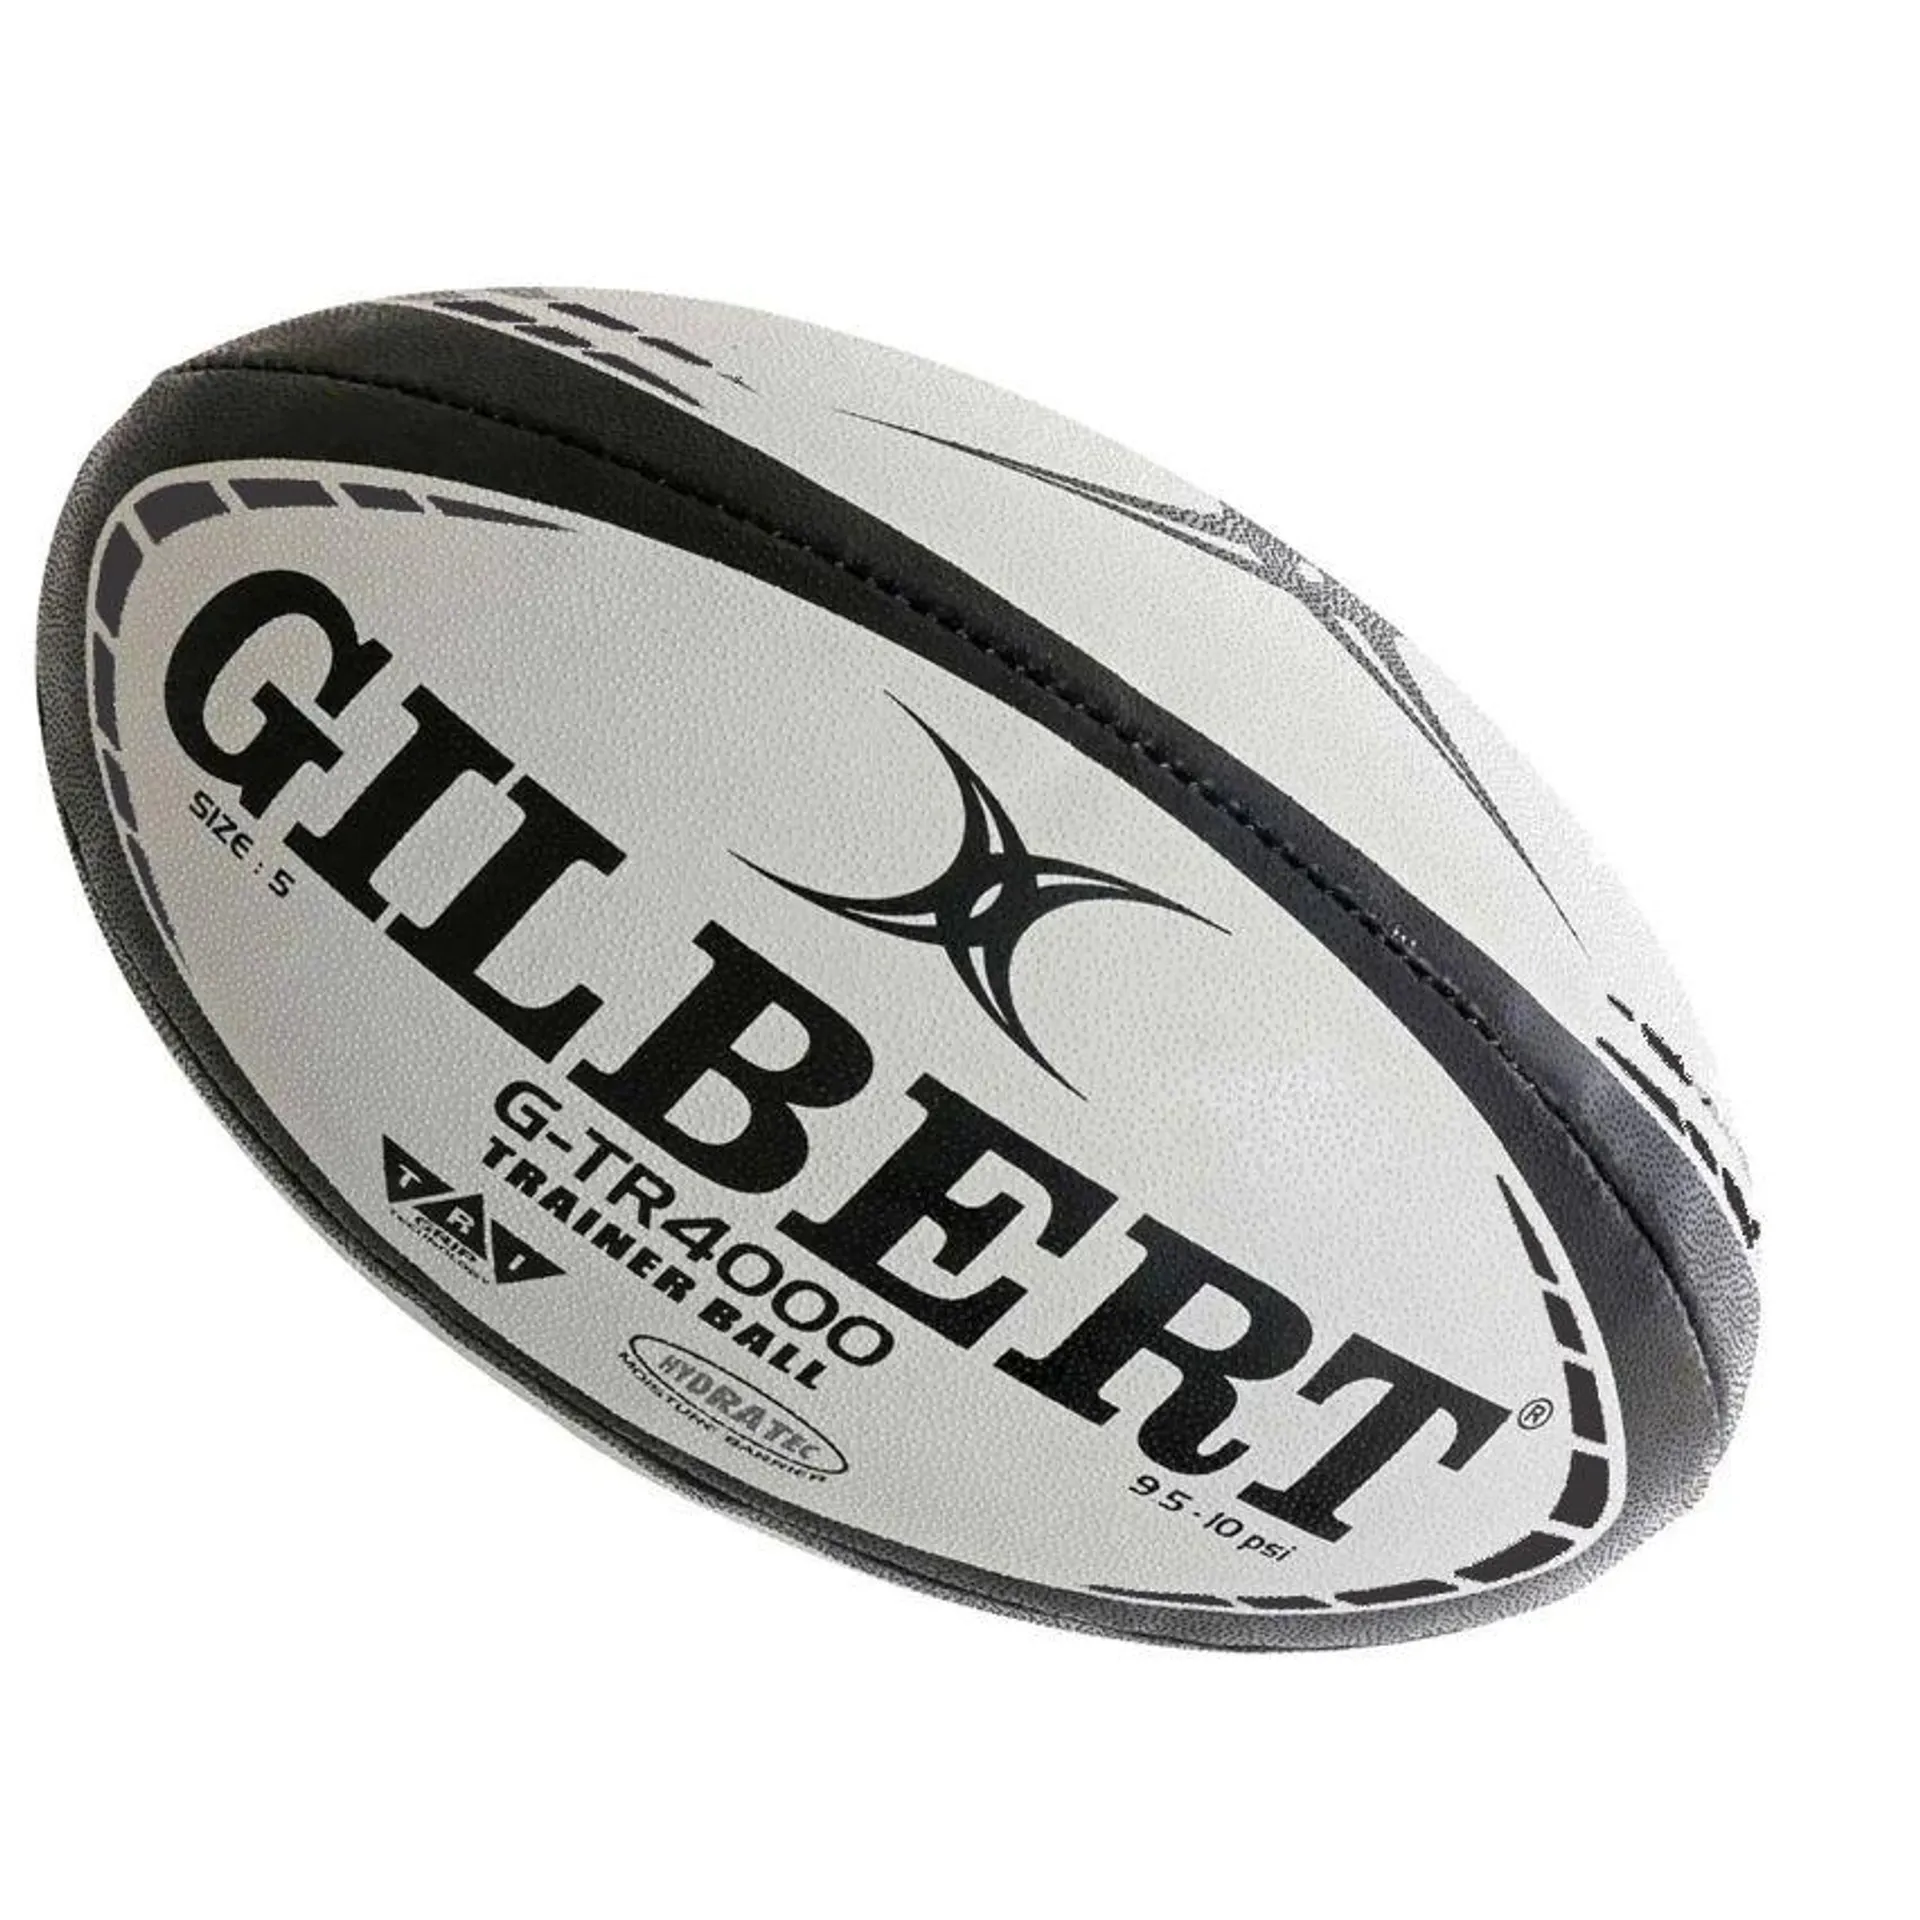 Ballon Rugby Entrainement G-TR4000 Boutique-Rugby.Com Taille 3 - Gilbert